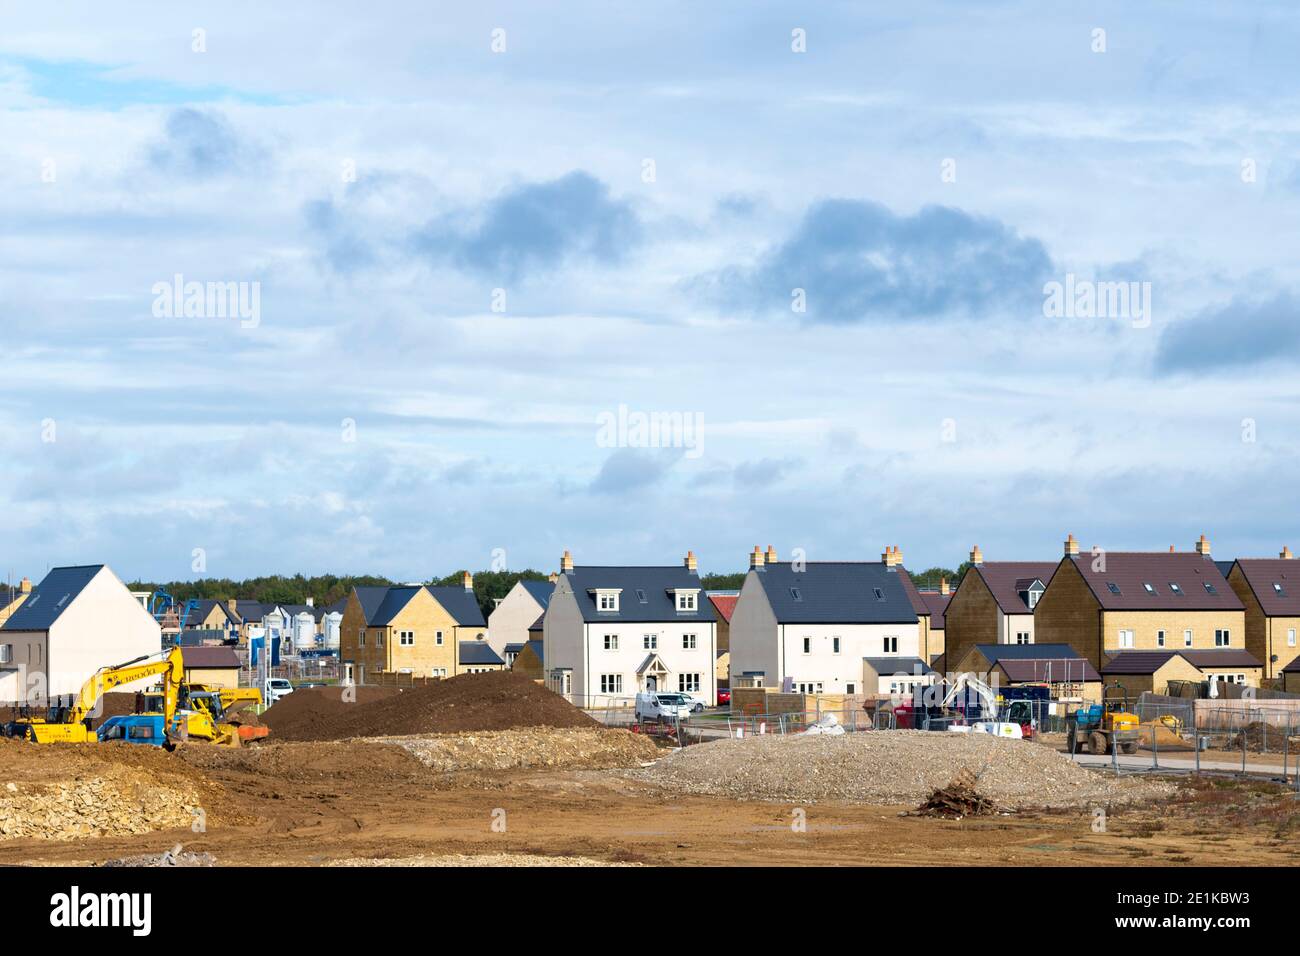 Builders working with JCB digger on a new housing development at West Witney on the outskirts of Oxford, West Oxfordshire, England due to population g Stock Photo